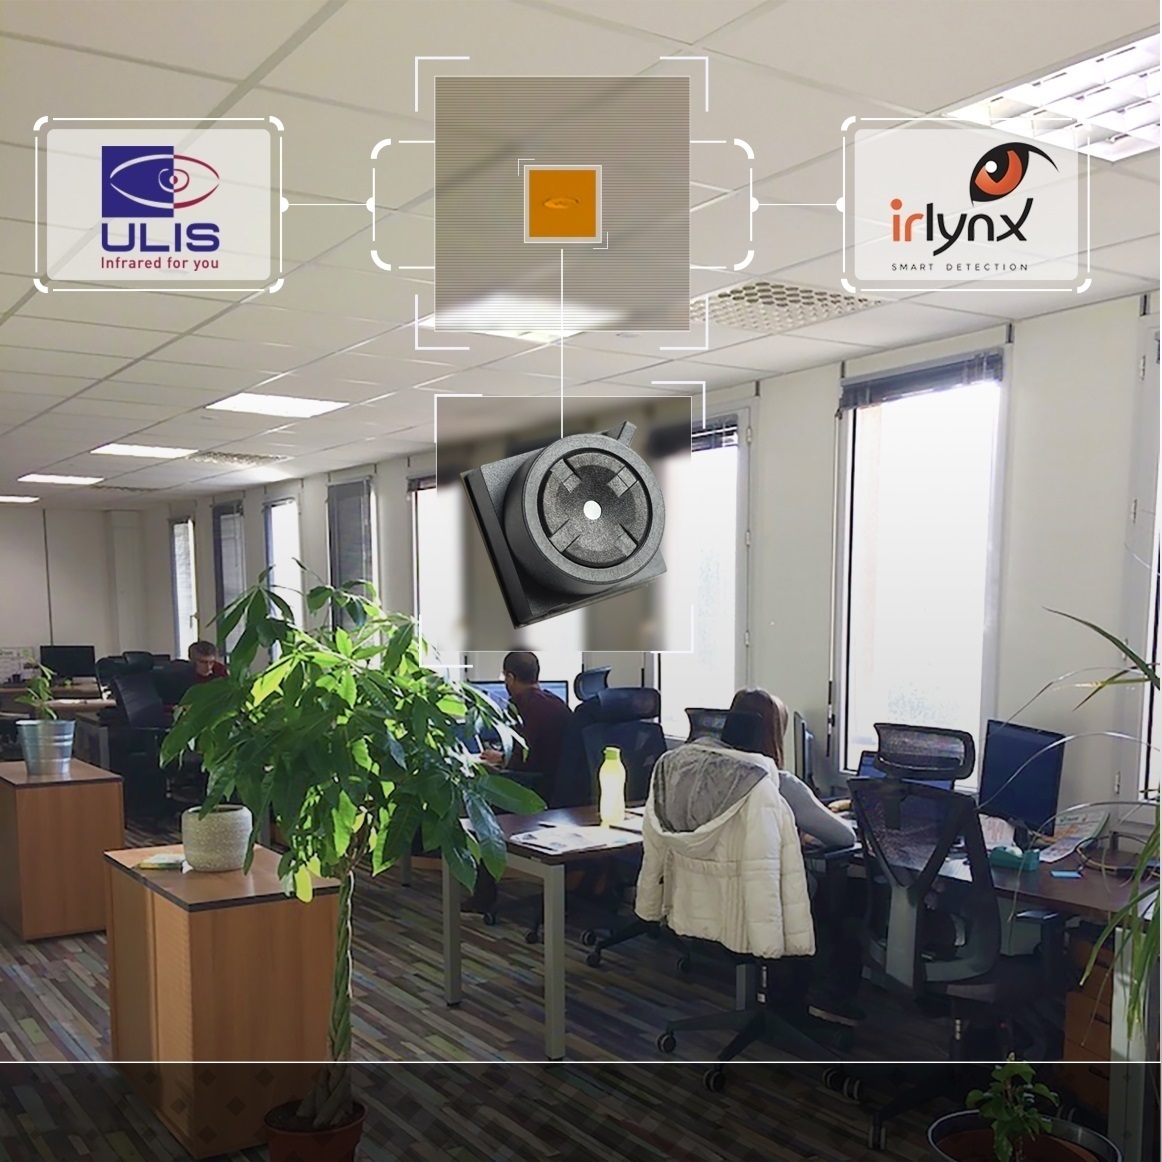 Irlynx will field test ULIS’ thermal sensor in several pilot studies it is undertaking with GE Digital, NEXITY and SNCF, among other smart occupancy and people counting projects linked to optimizing open space areas and reducing building footprint